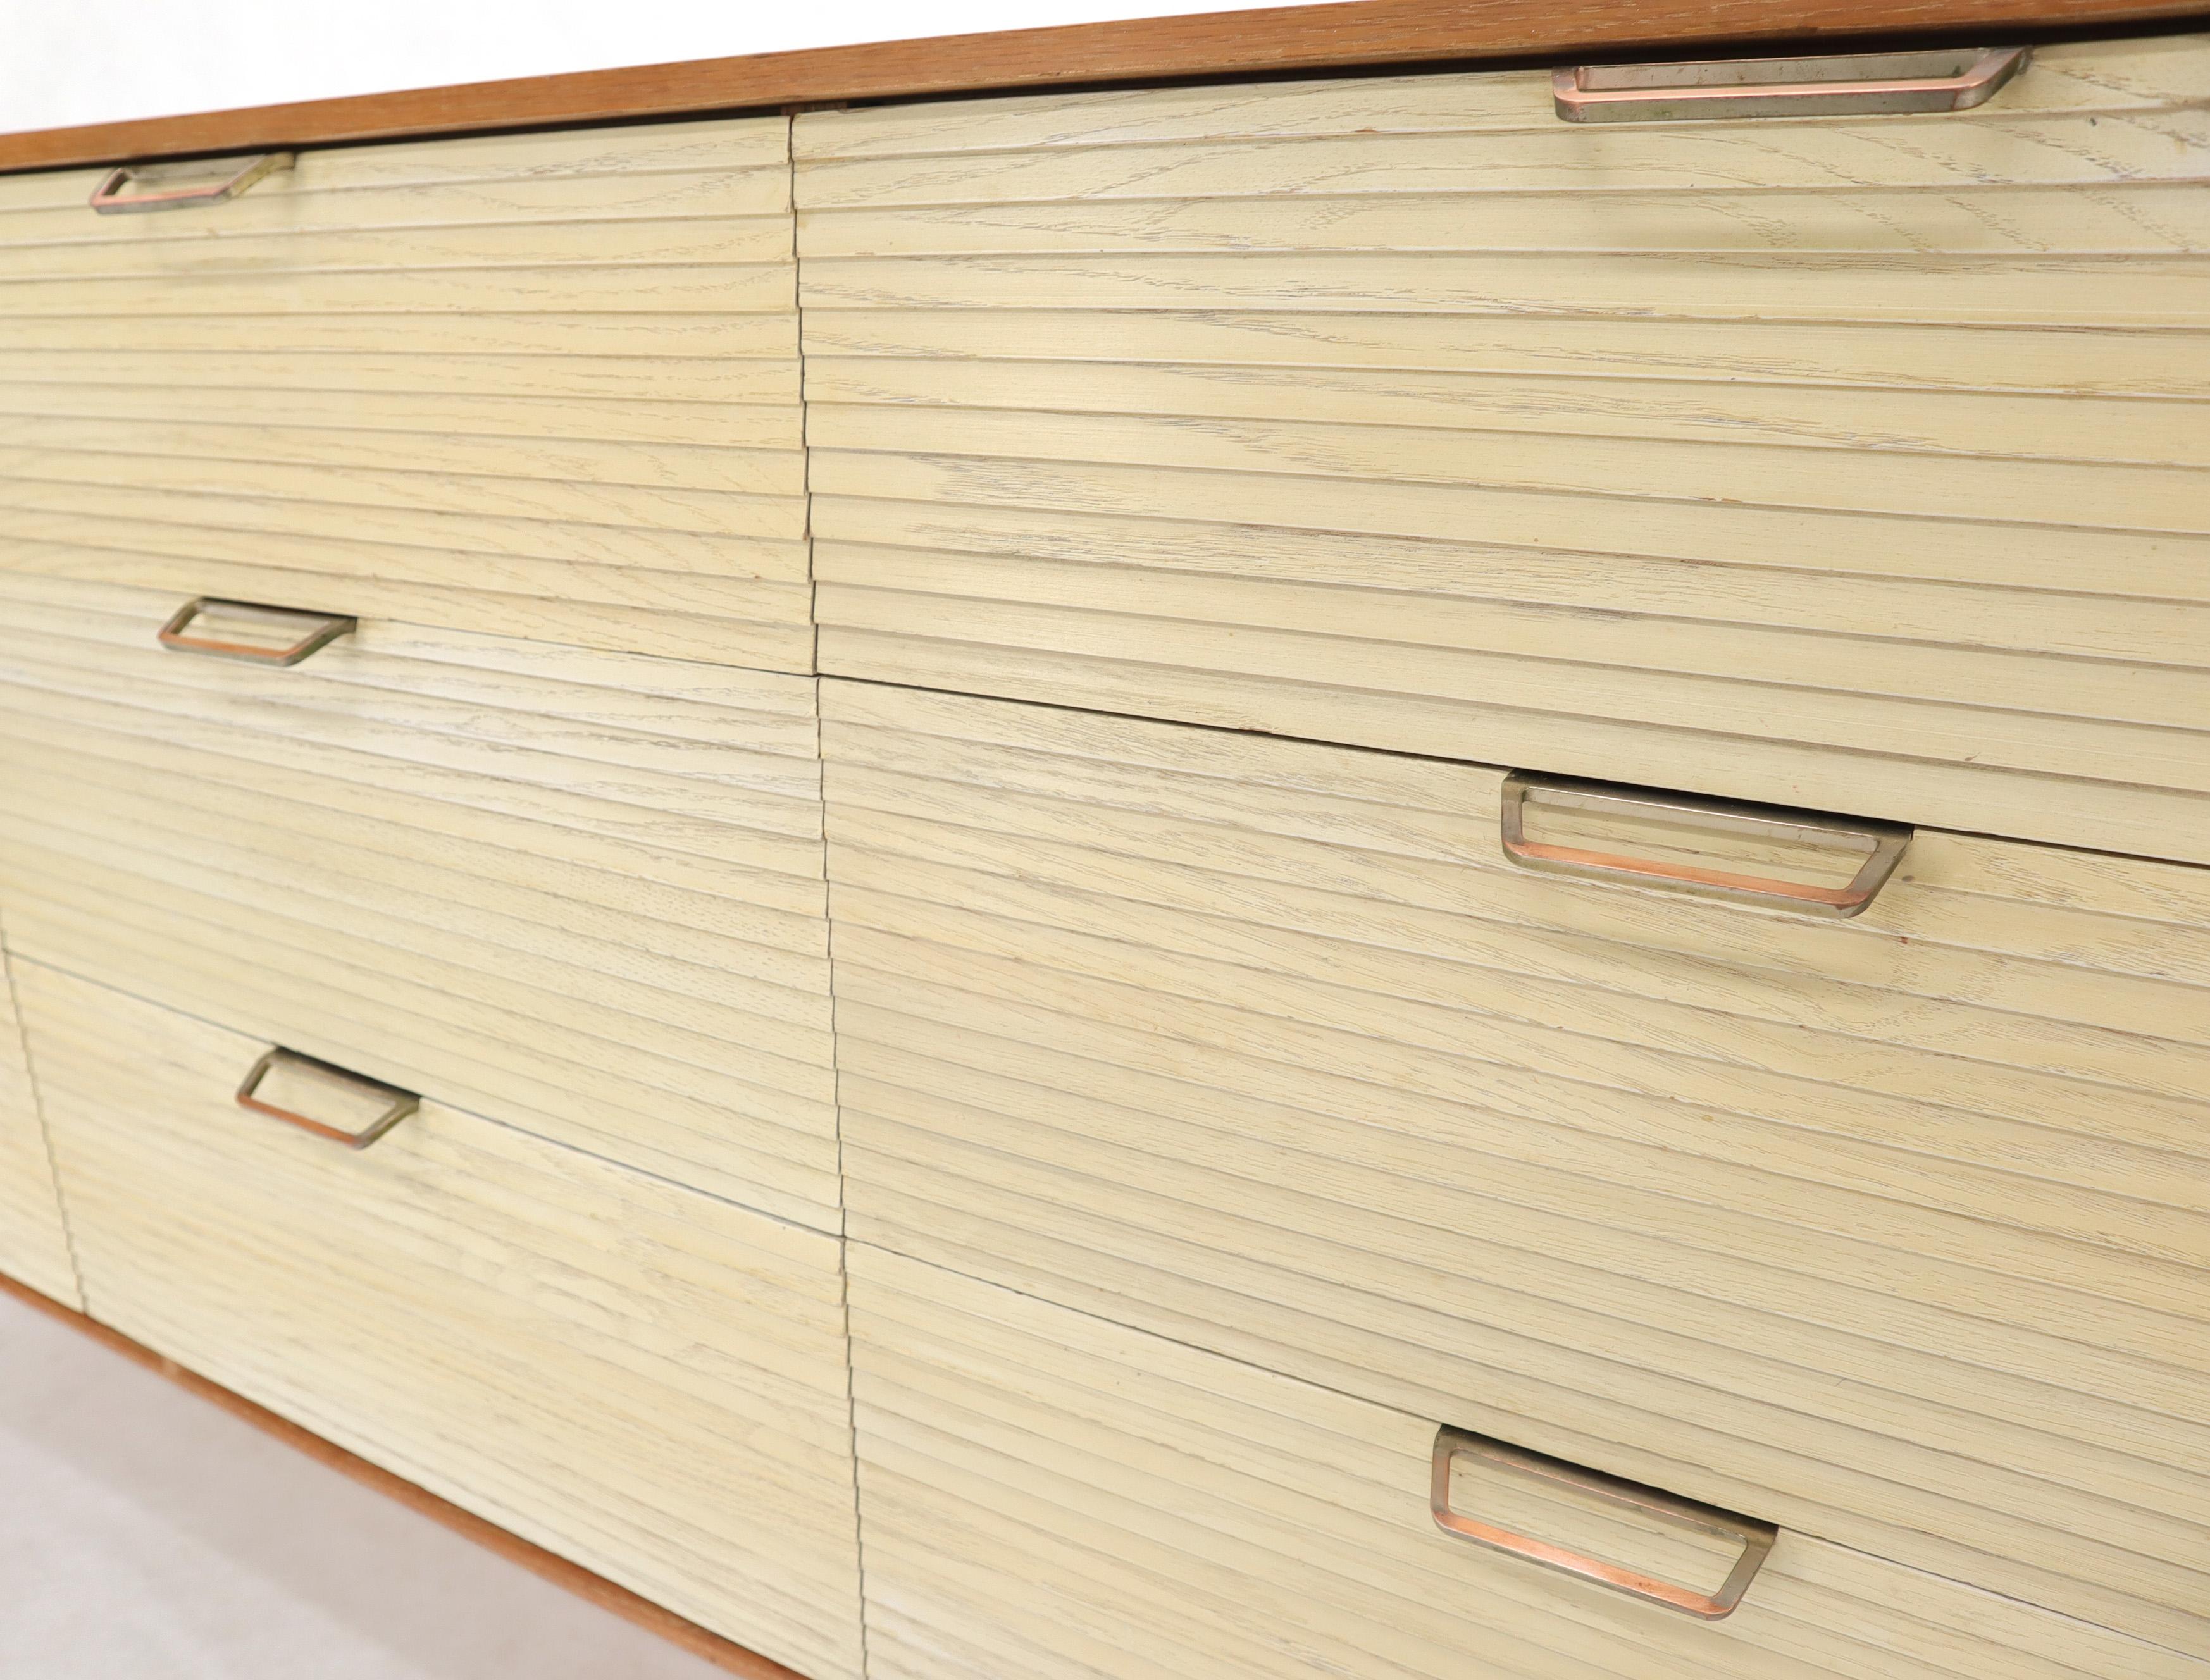 Mid-Century Modern perused oak dresser by Mengel. Two-tone finish natural oak with white louver shape drawer fronts. Dowel shape legs with stretchers. NYC area delivery starts from $150.